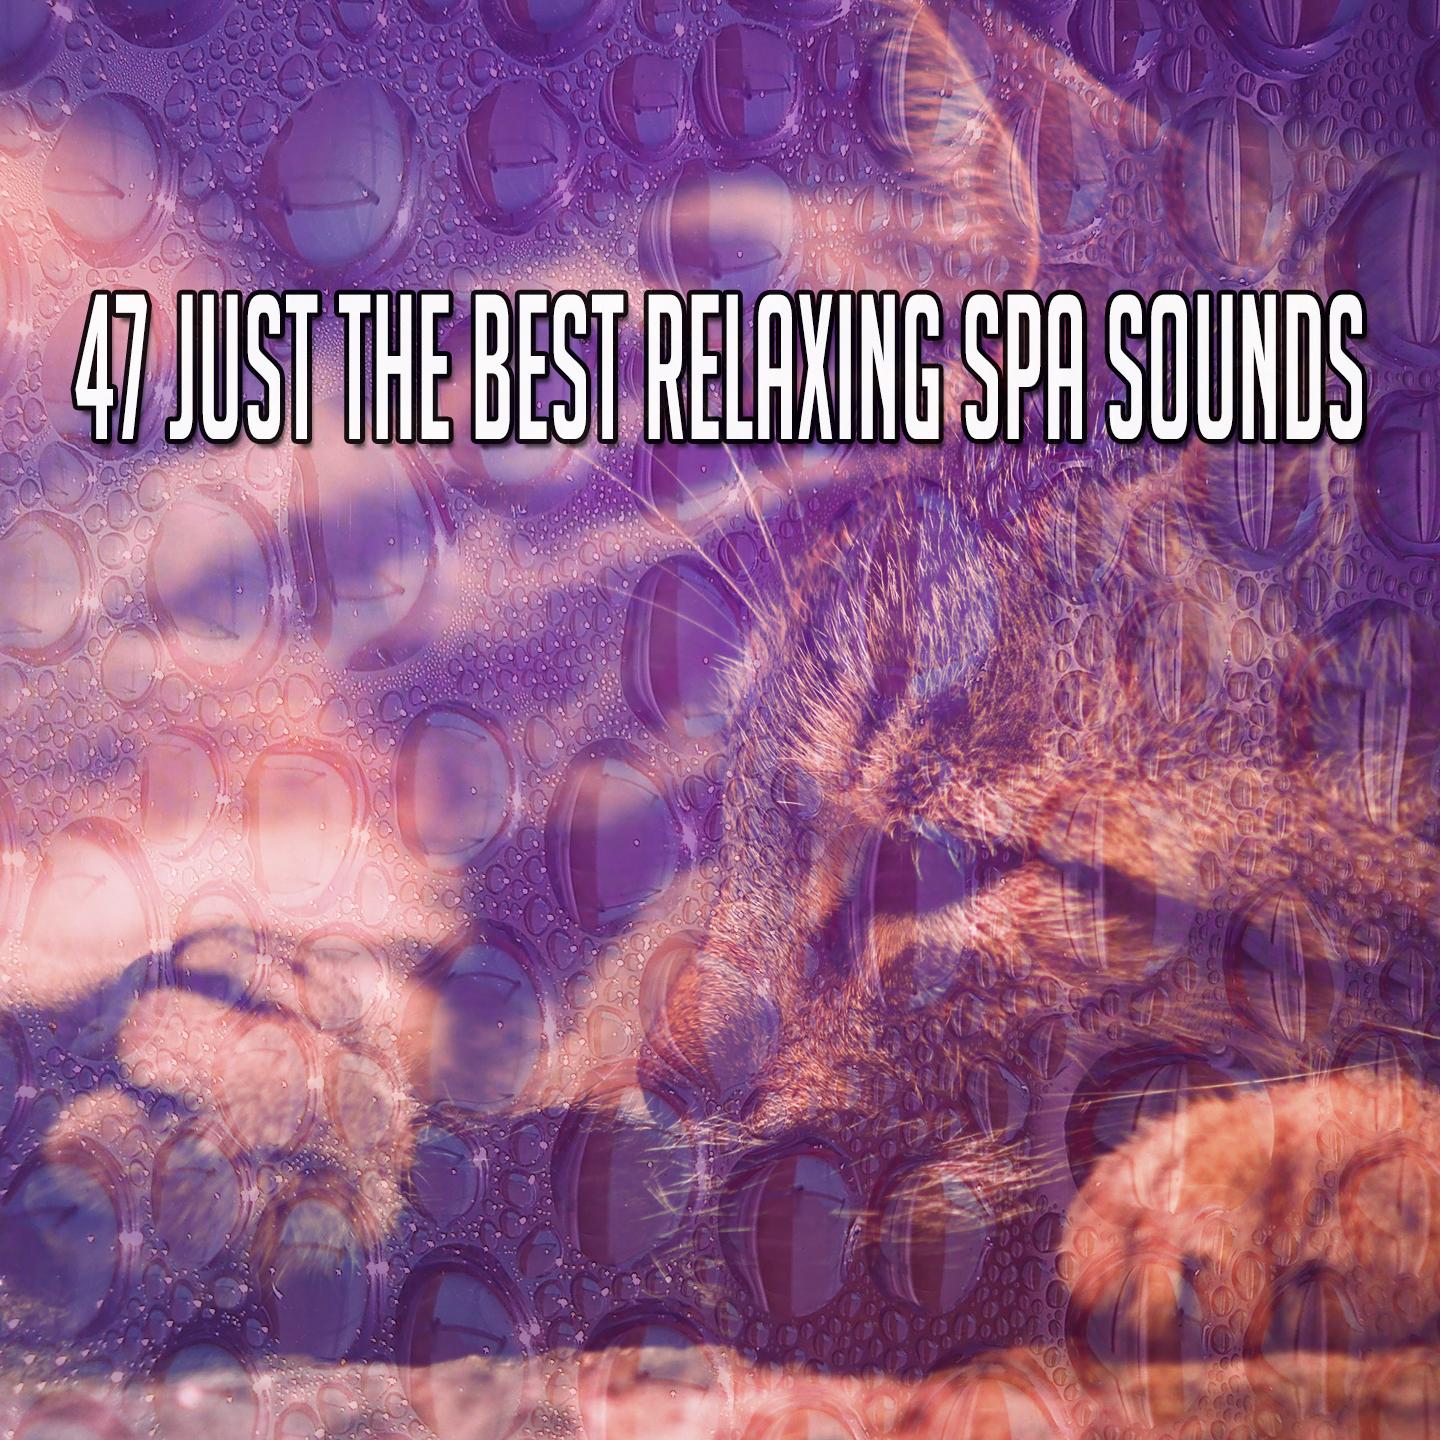 47 Just The Best Relaxing Spa Sounds